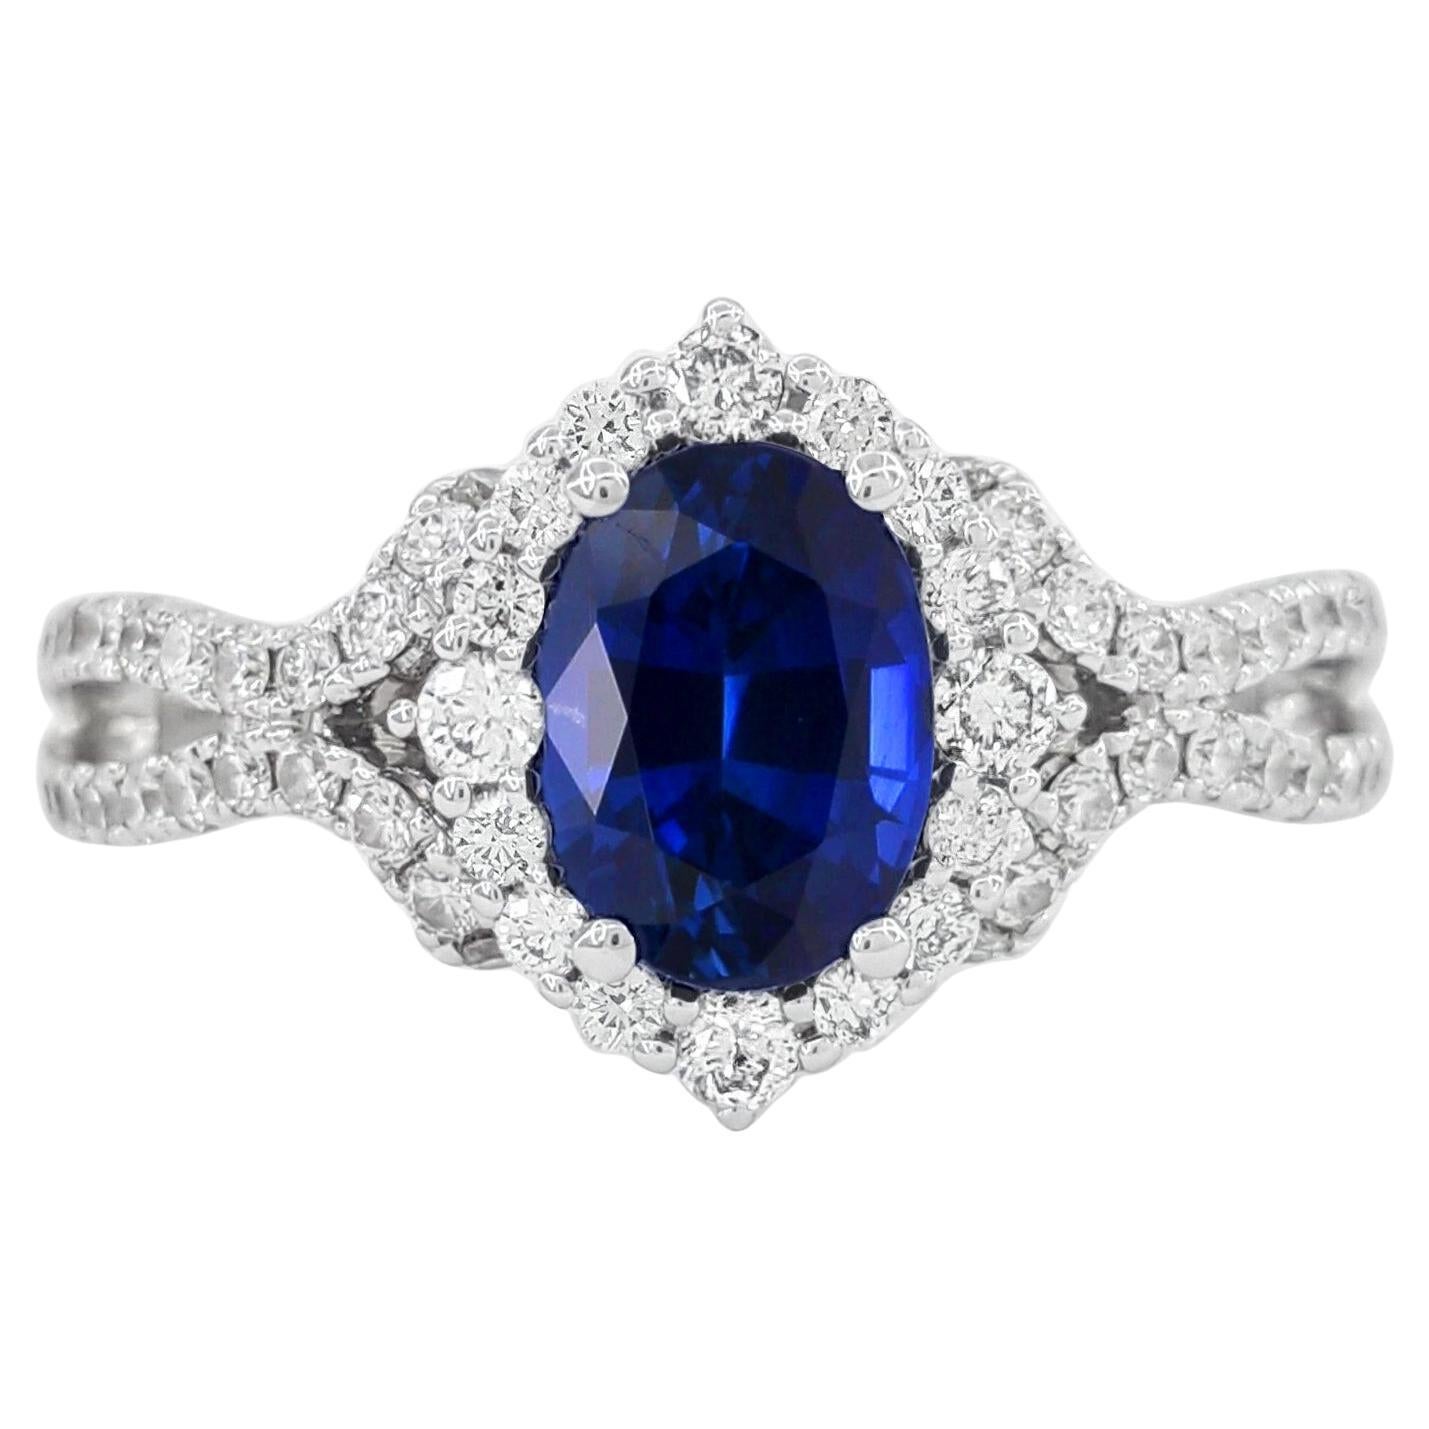 GIA Certified Blue Oval Sapphire Diamond Ring